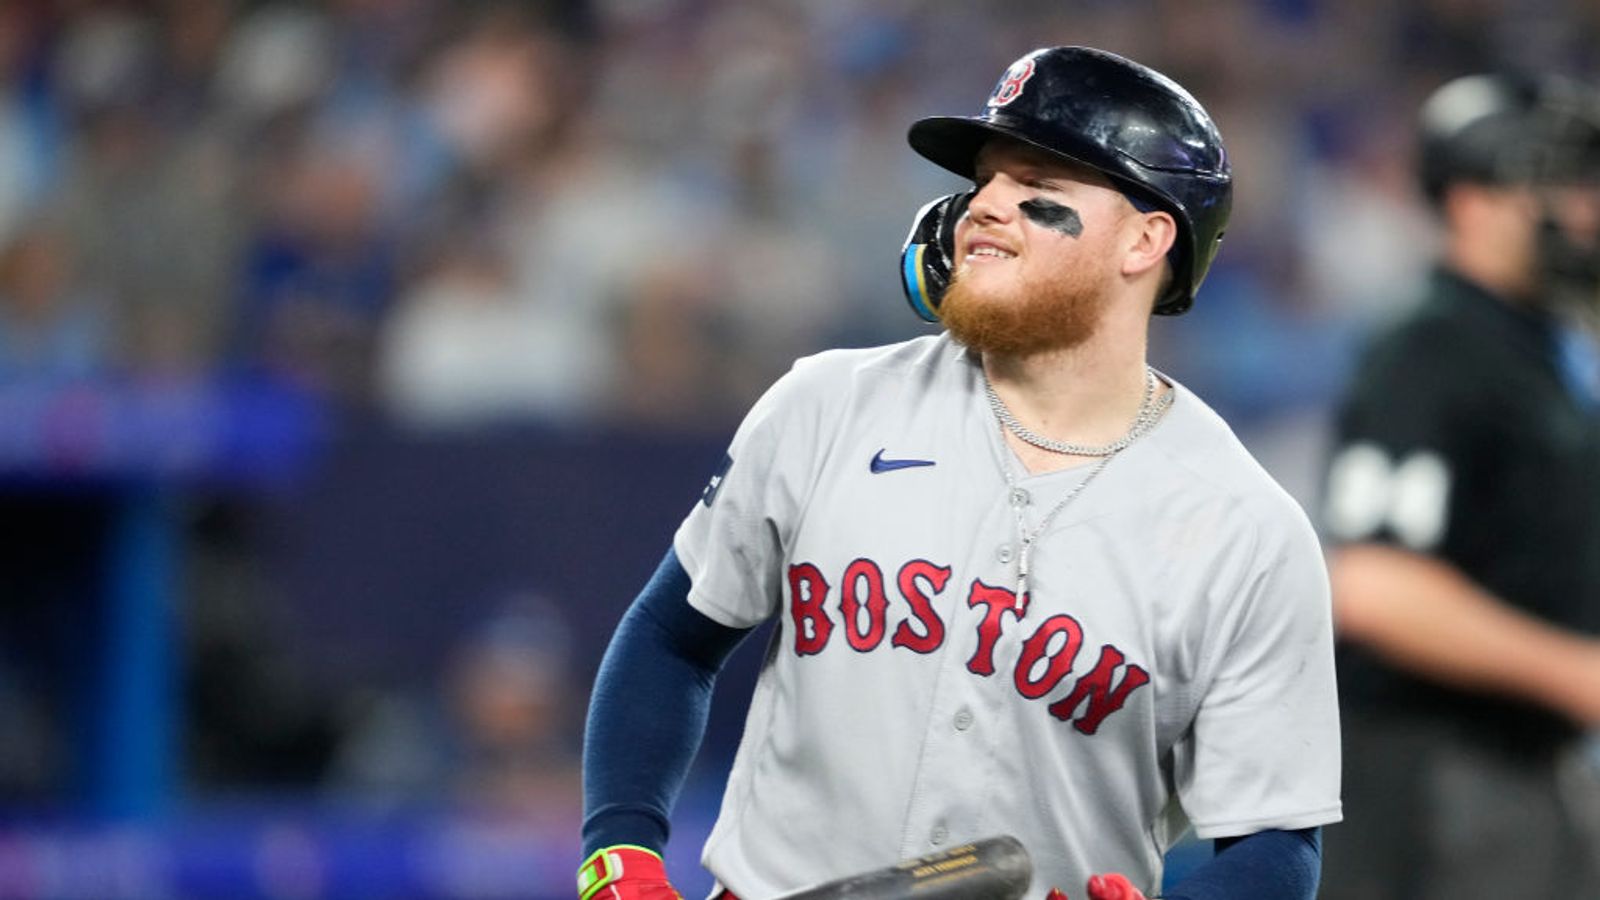 BSJ Live Coverage: Red Sox (42-42) at Blue Jays (45-39), 1:37 p.m. - Red Sox  go for the sweep in Toronto